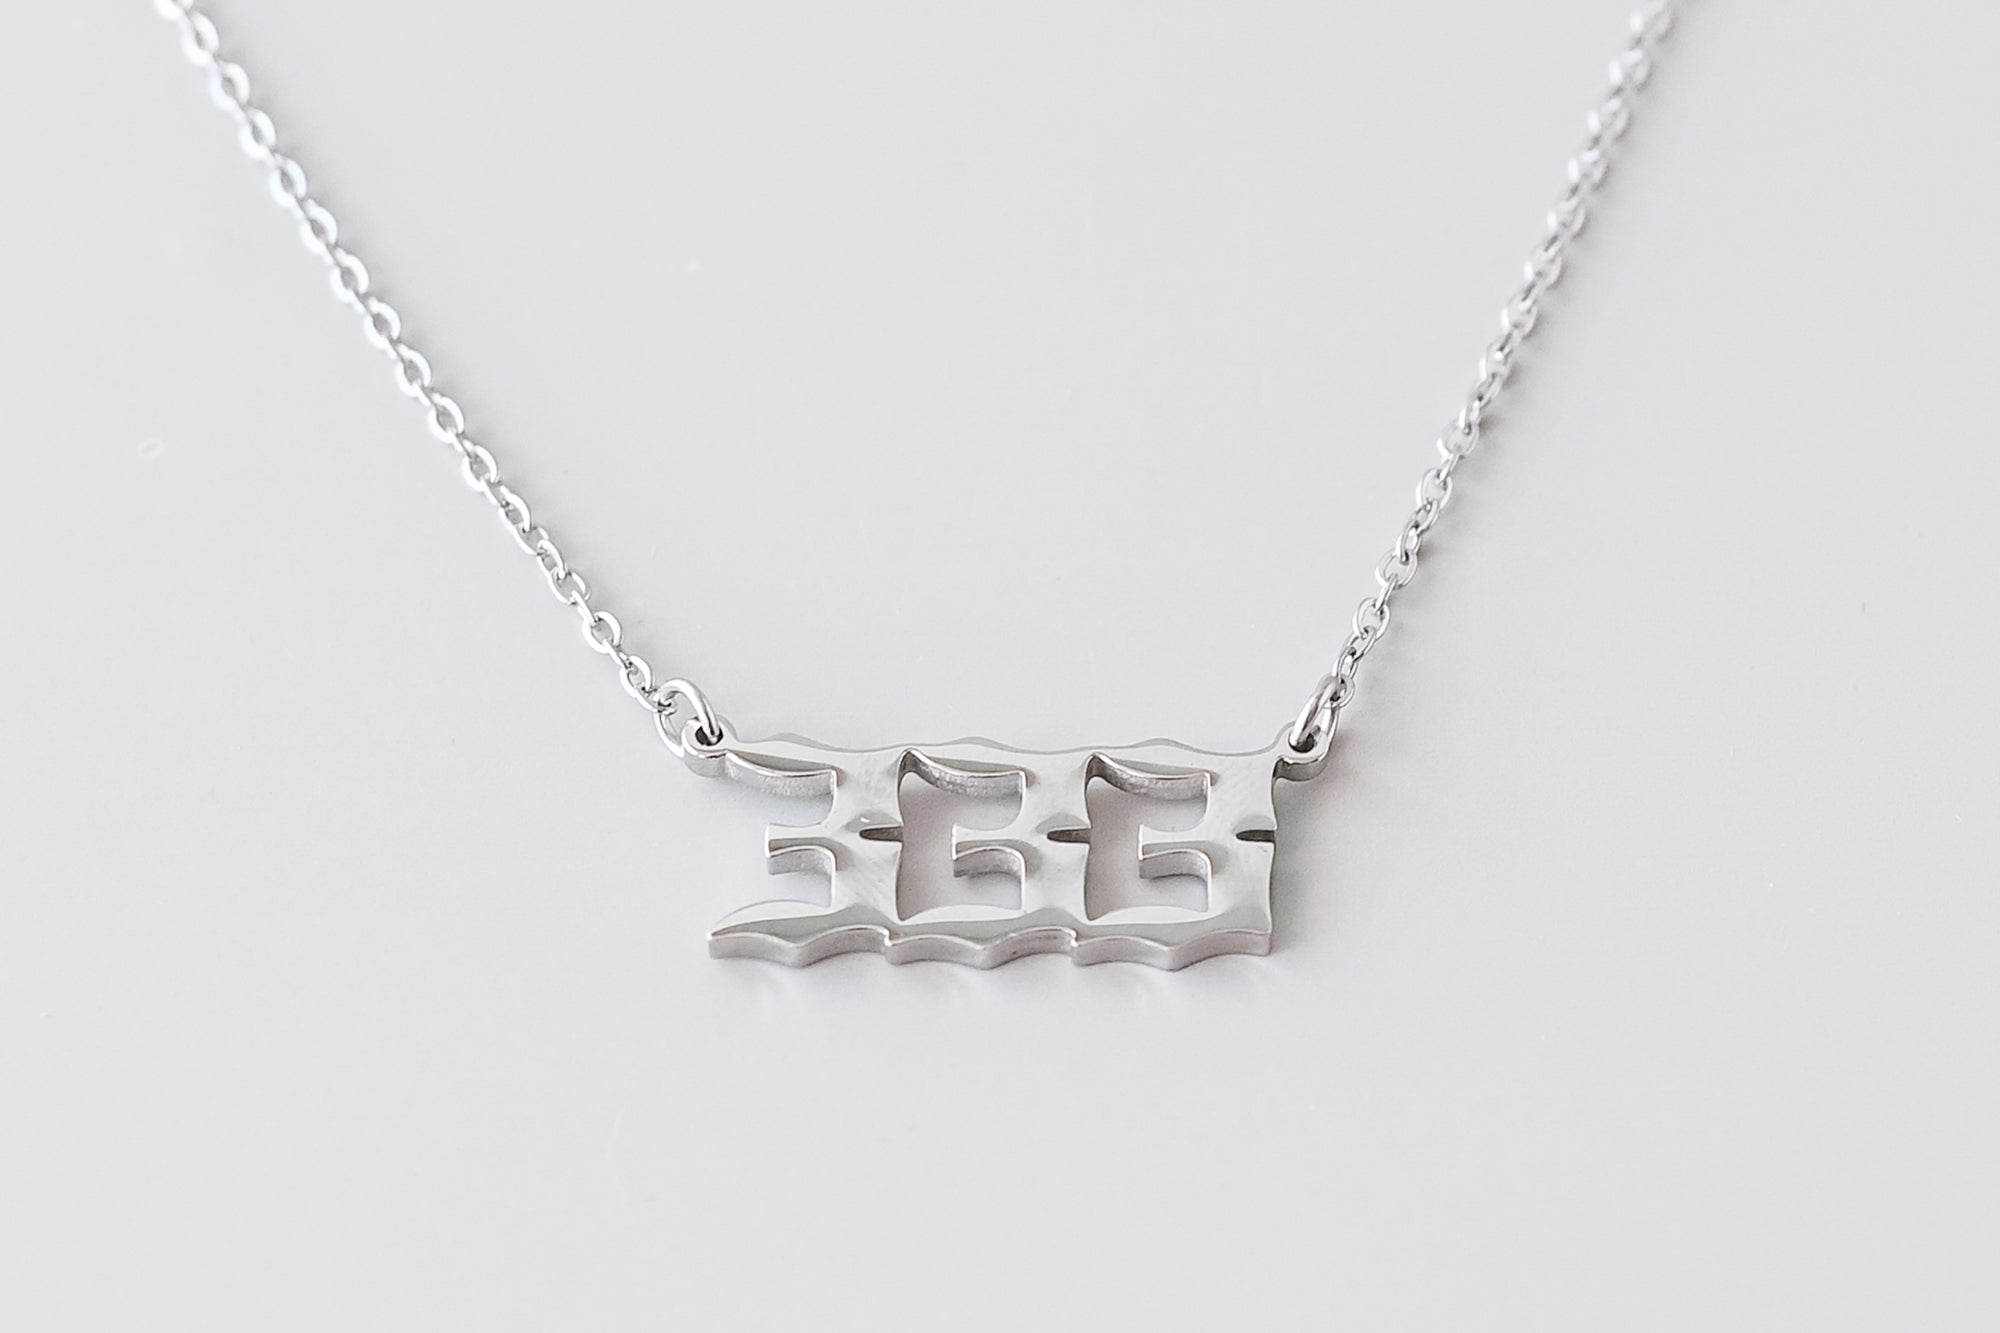 '333' Silver Angel Number Necklace